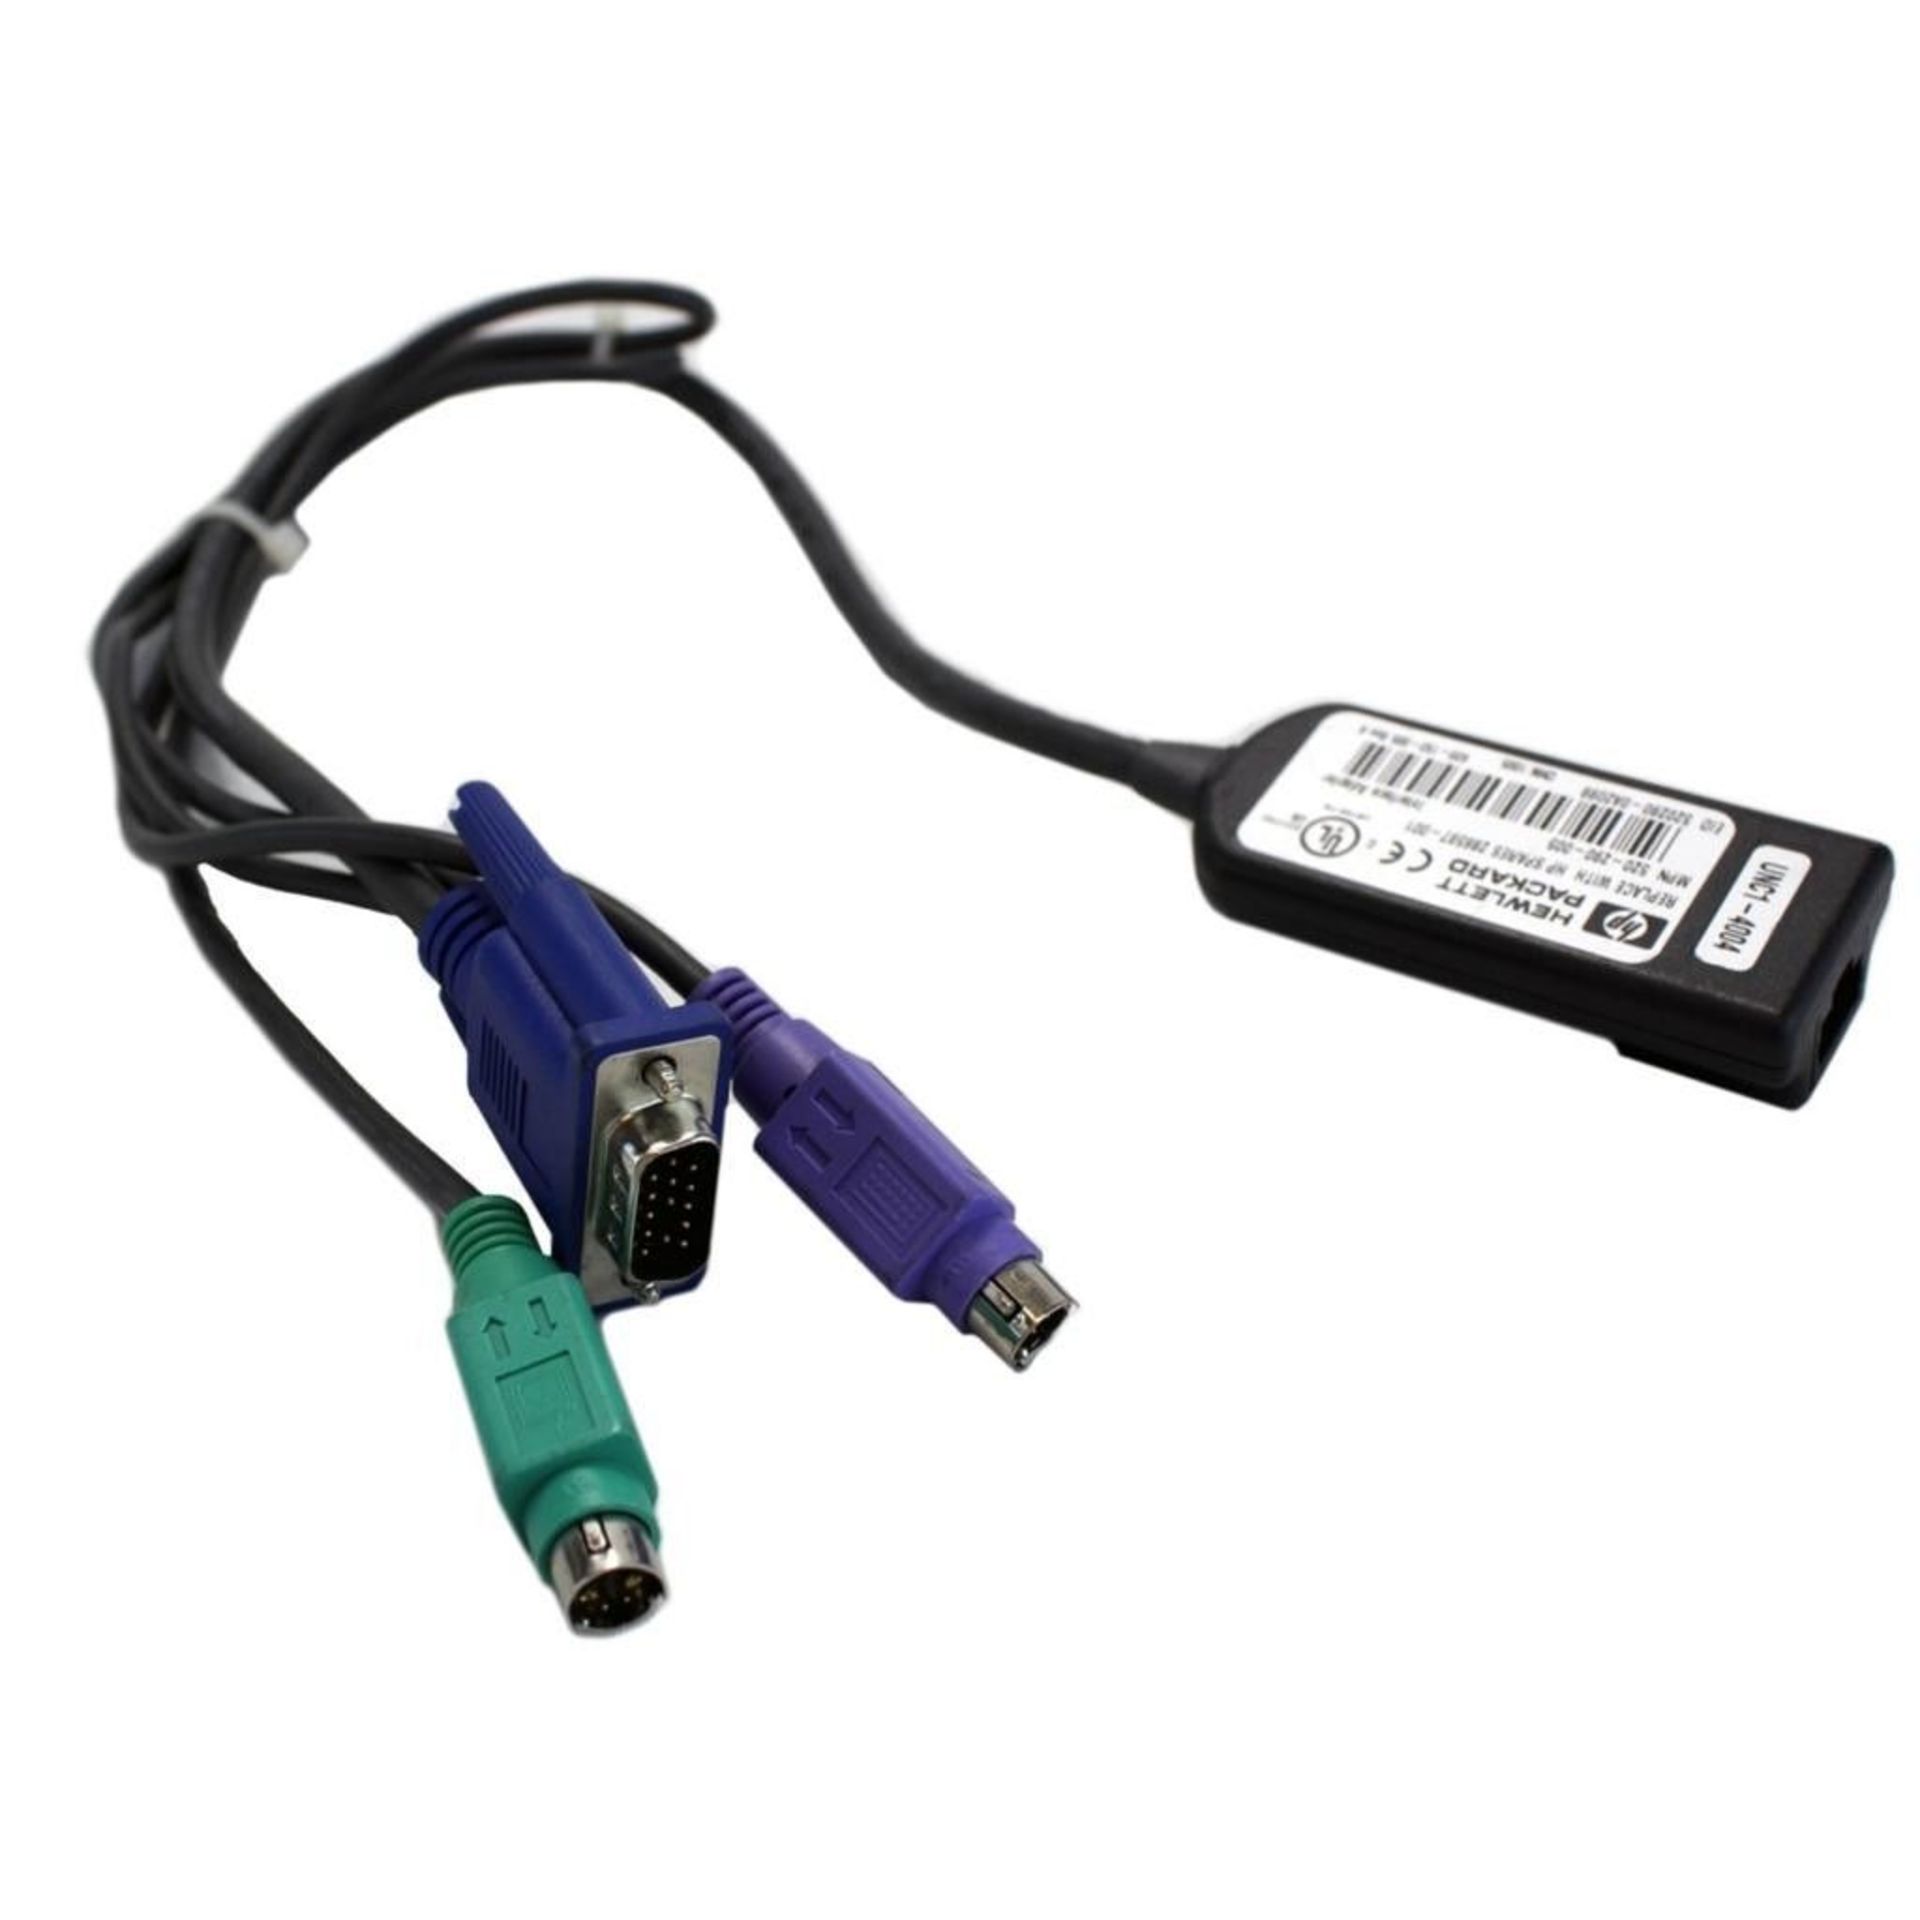 20 x HP KVM Console to IP Ethernet Adapter Dongle Cables - Part No: 286597-001 - CL106 - Ref